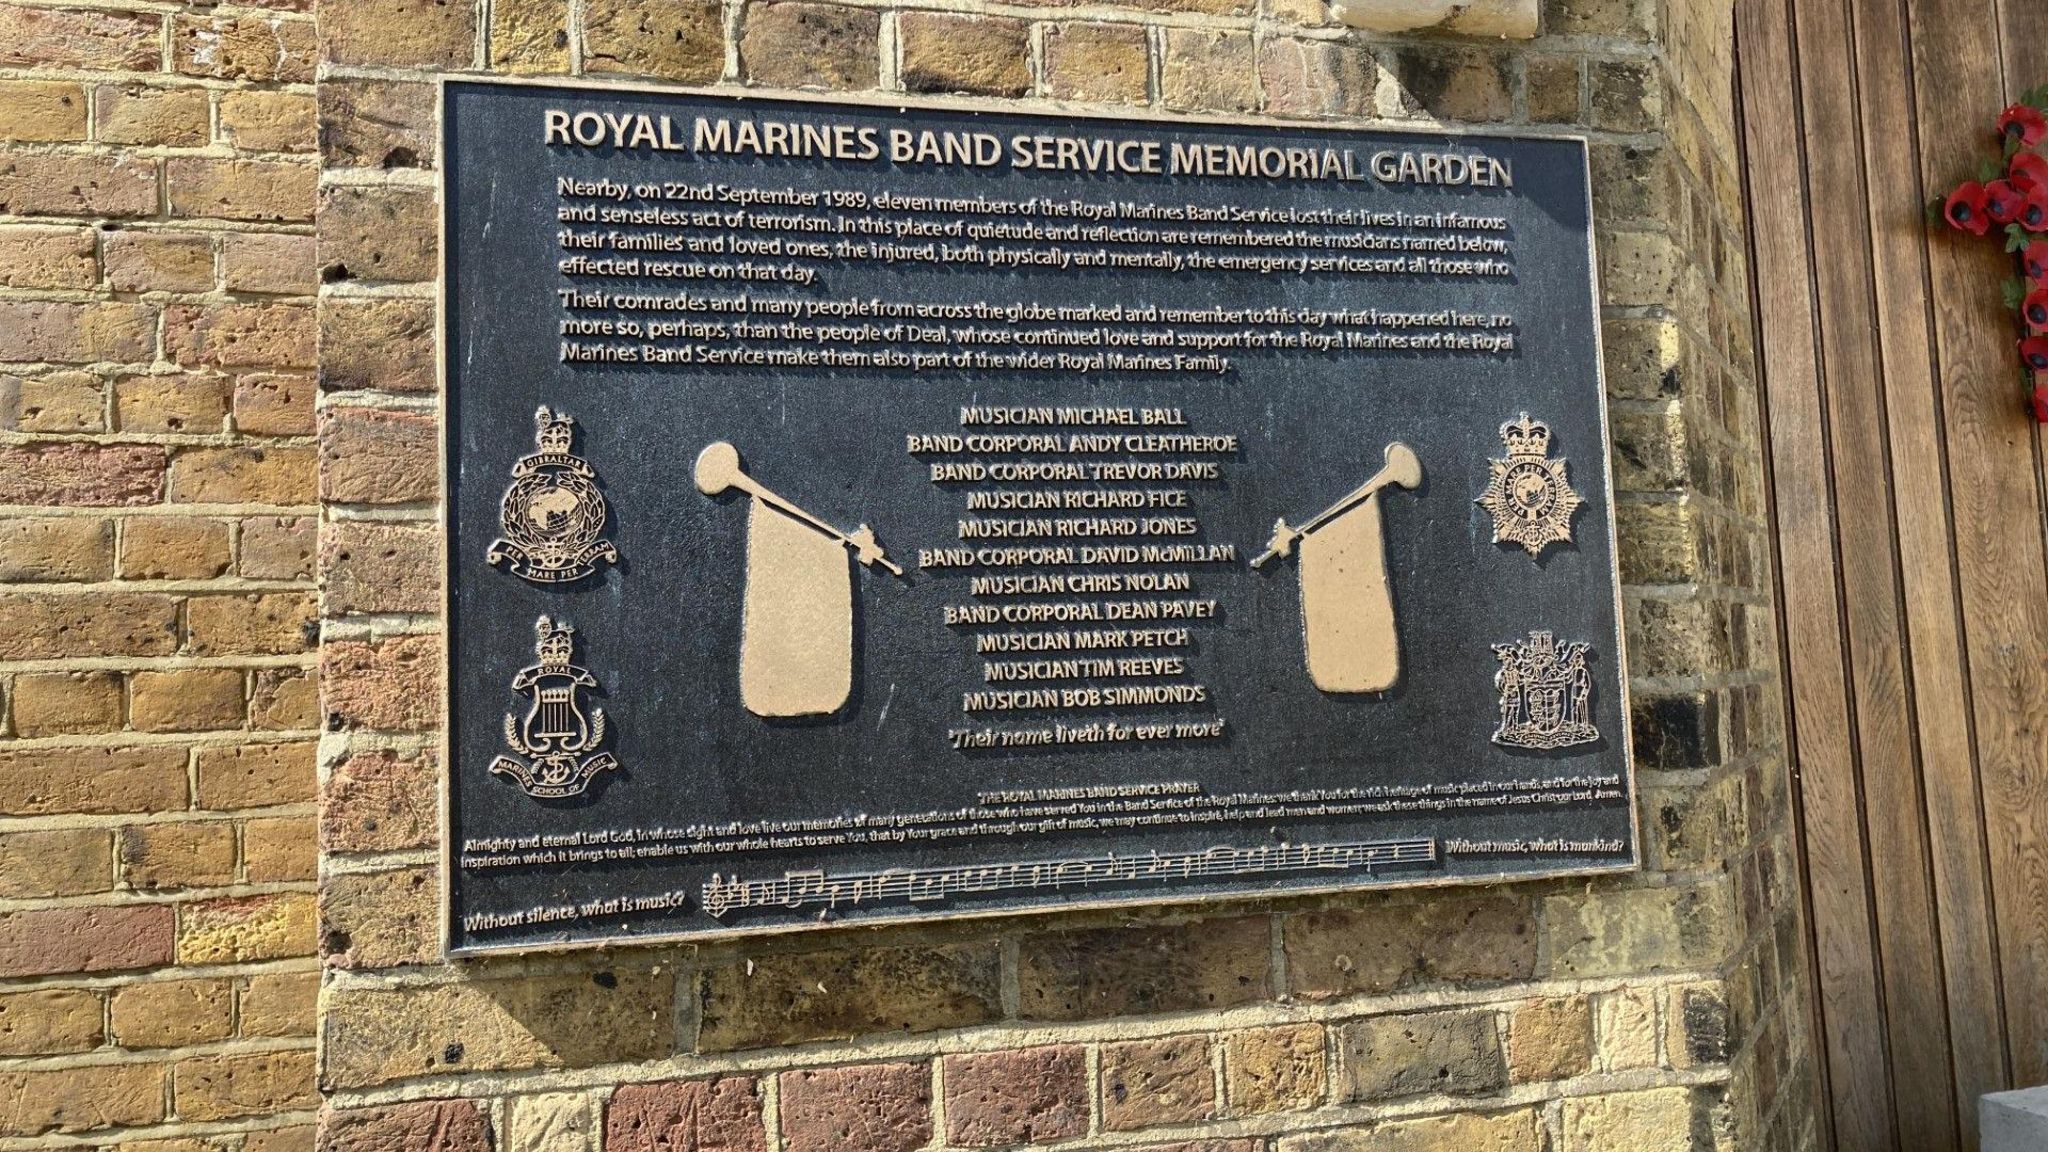 The sign at the entrance to the Royal Marines' memorial garden